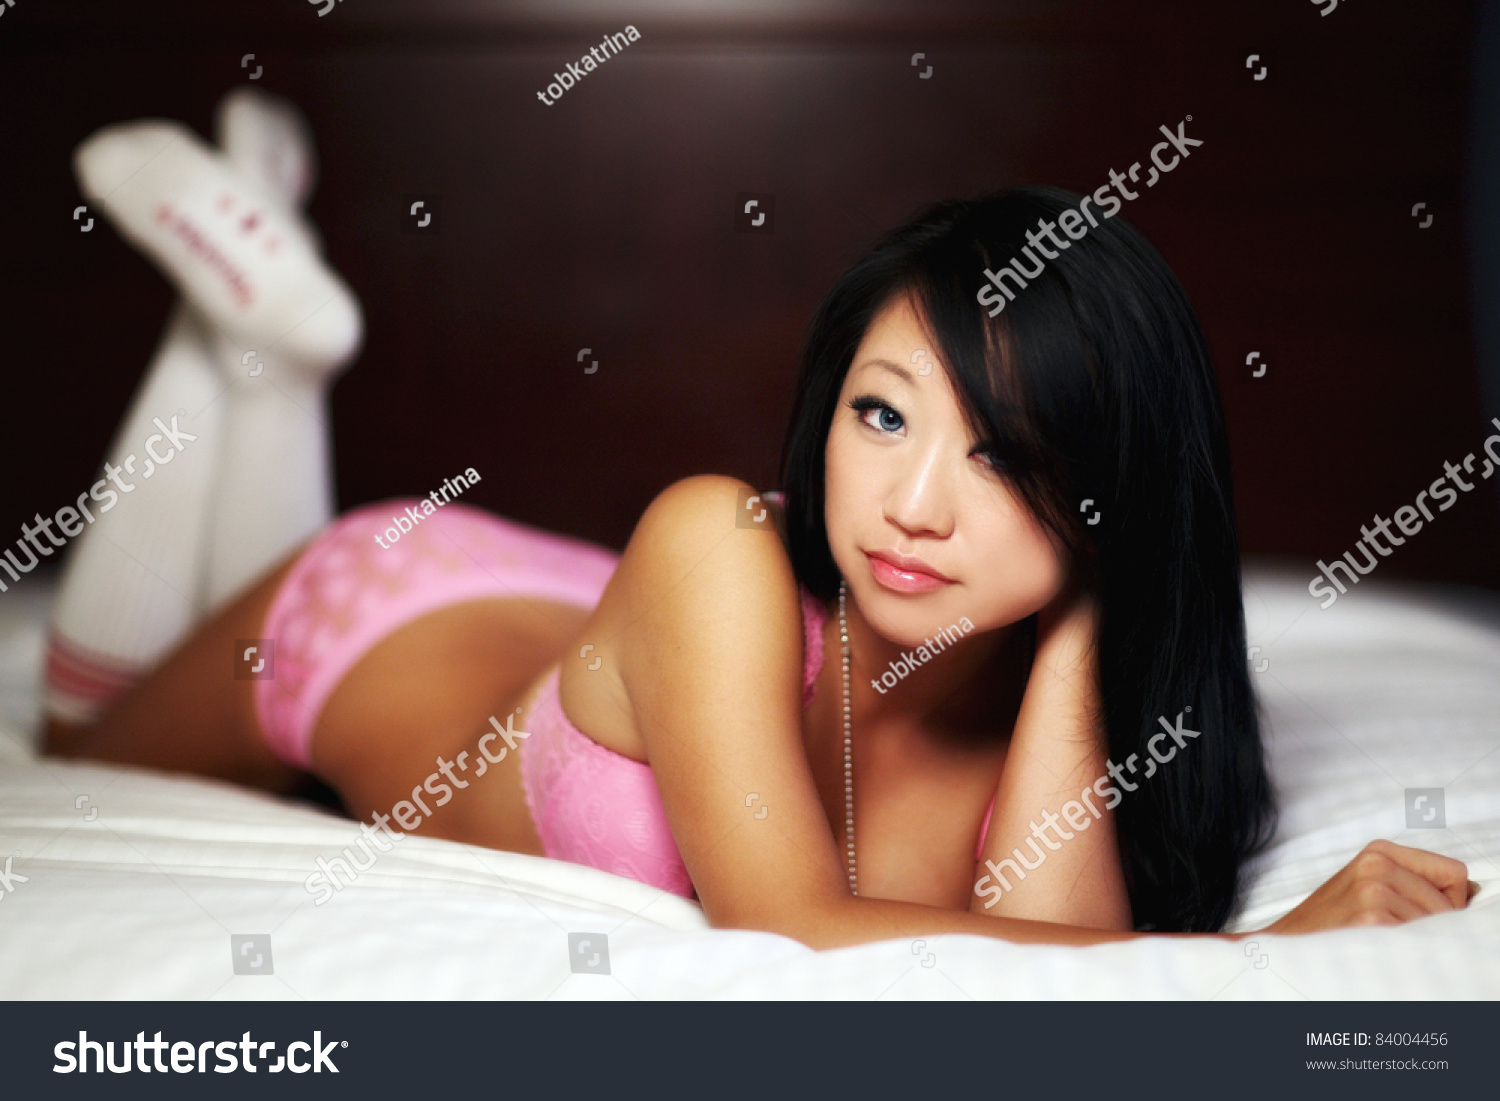 Sexy Asian Woman Wearing Lingerie In Bed Stock Photo Shutterstock